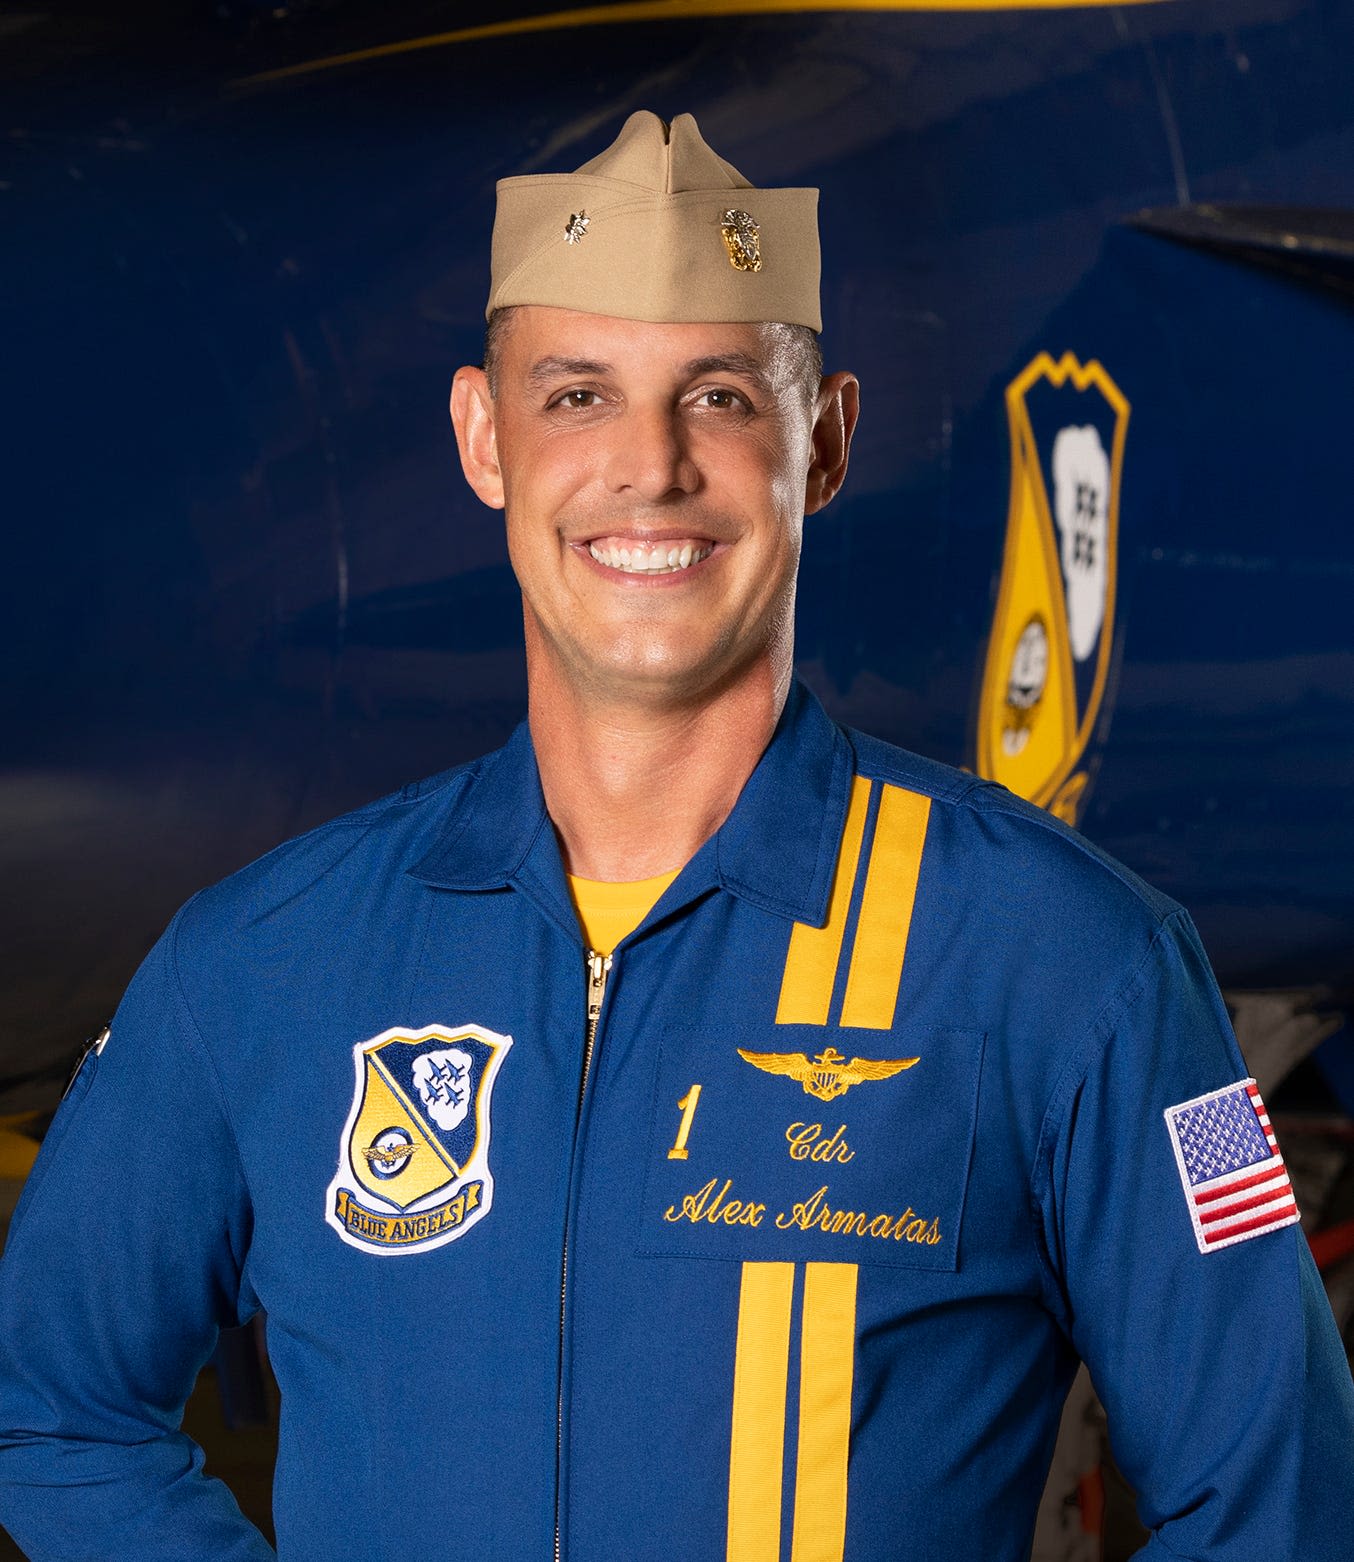 Ever wondered how to become a Blue Angels pilot or support staff? Here's your answer.